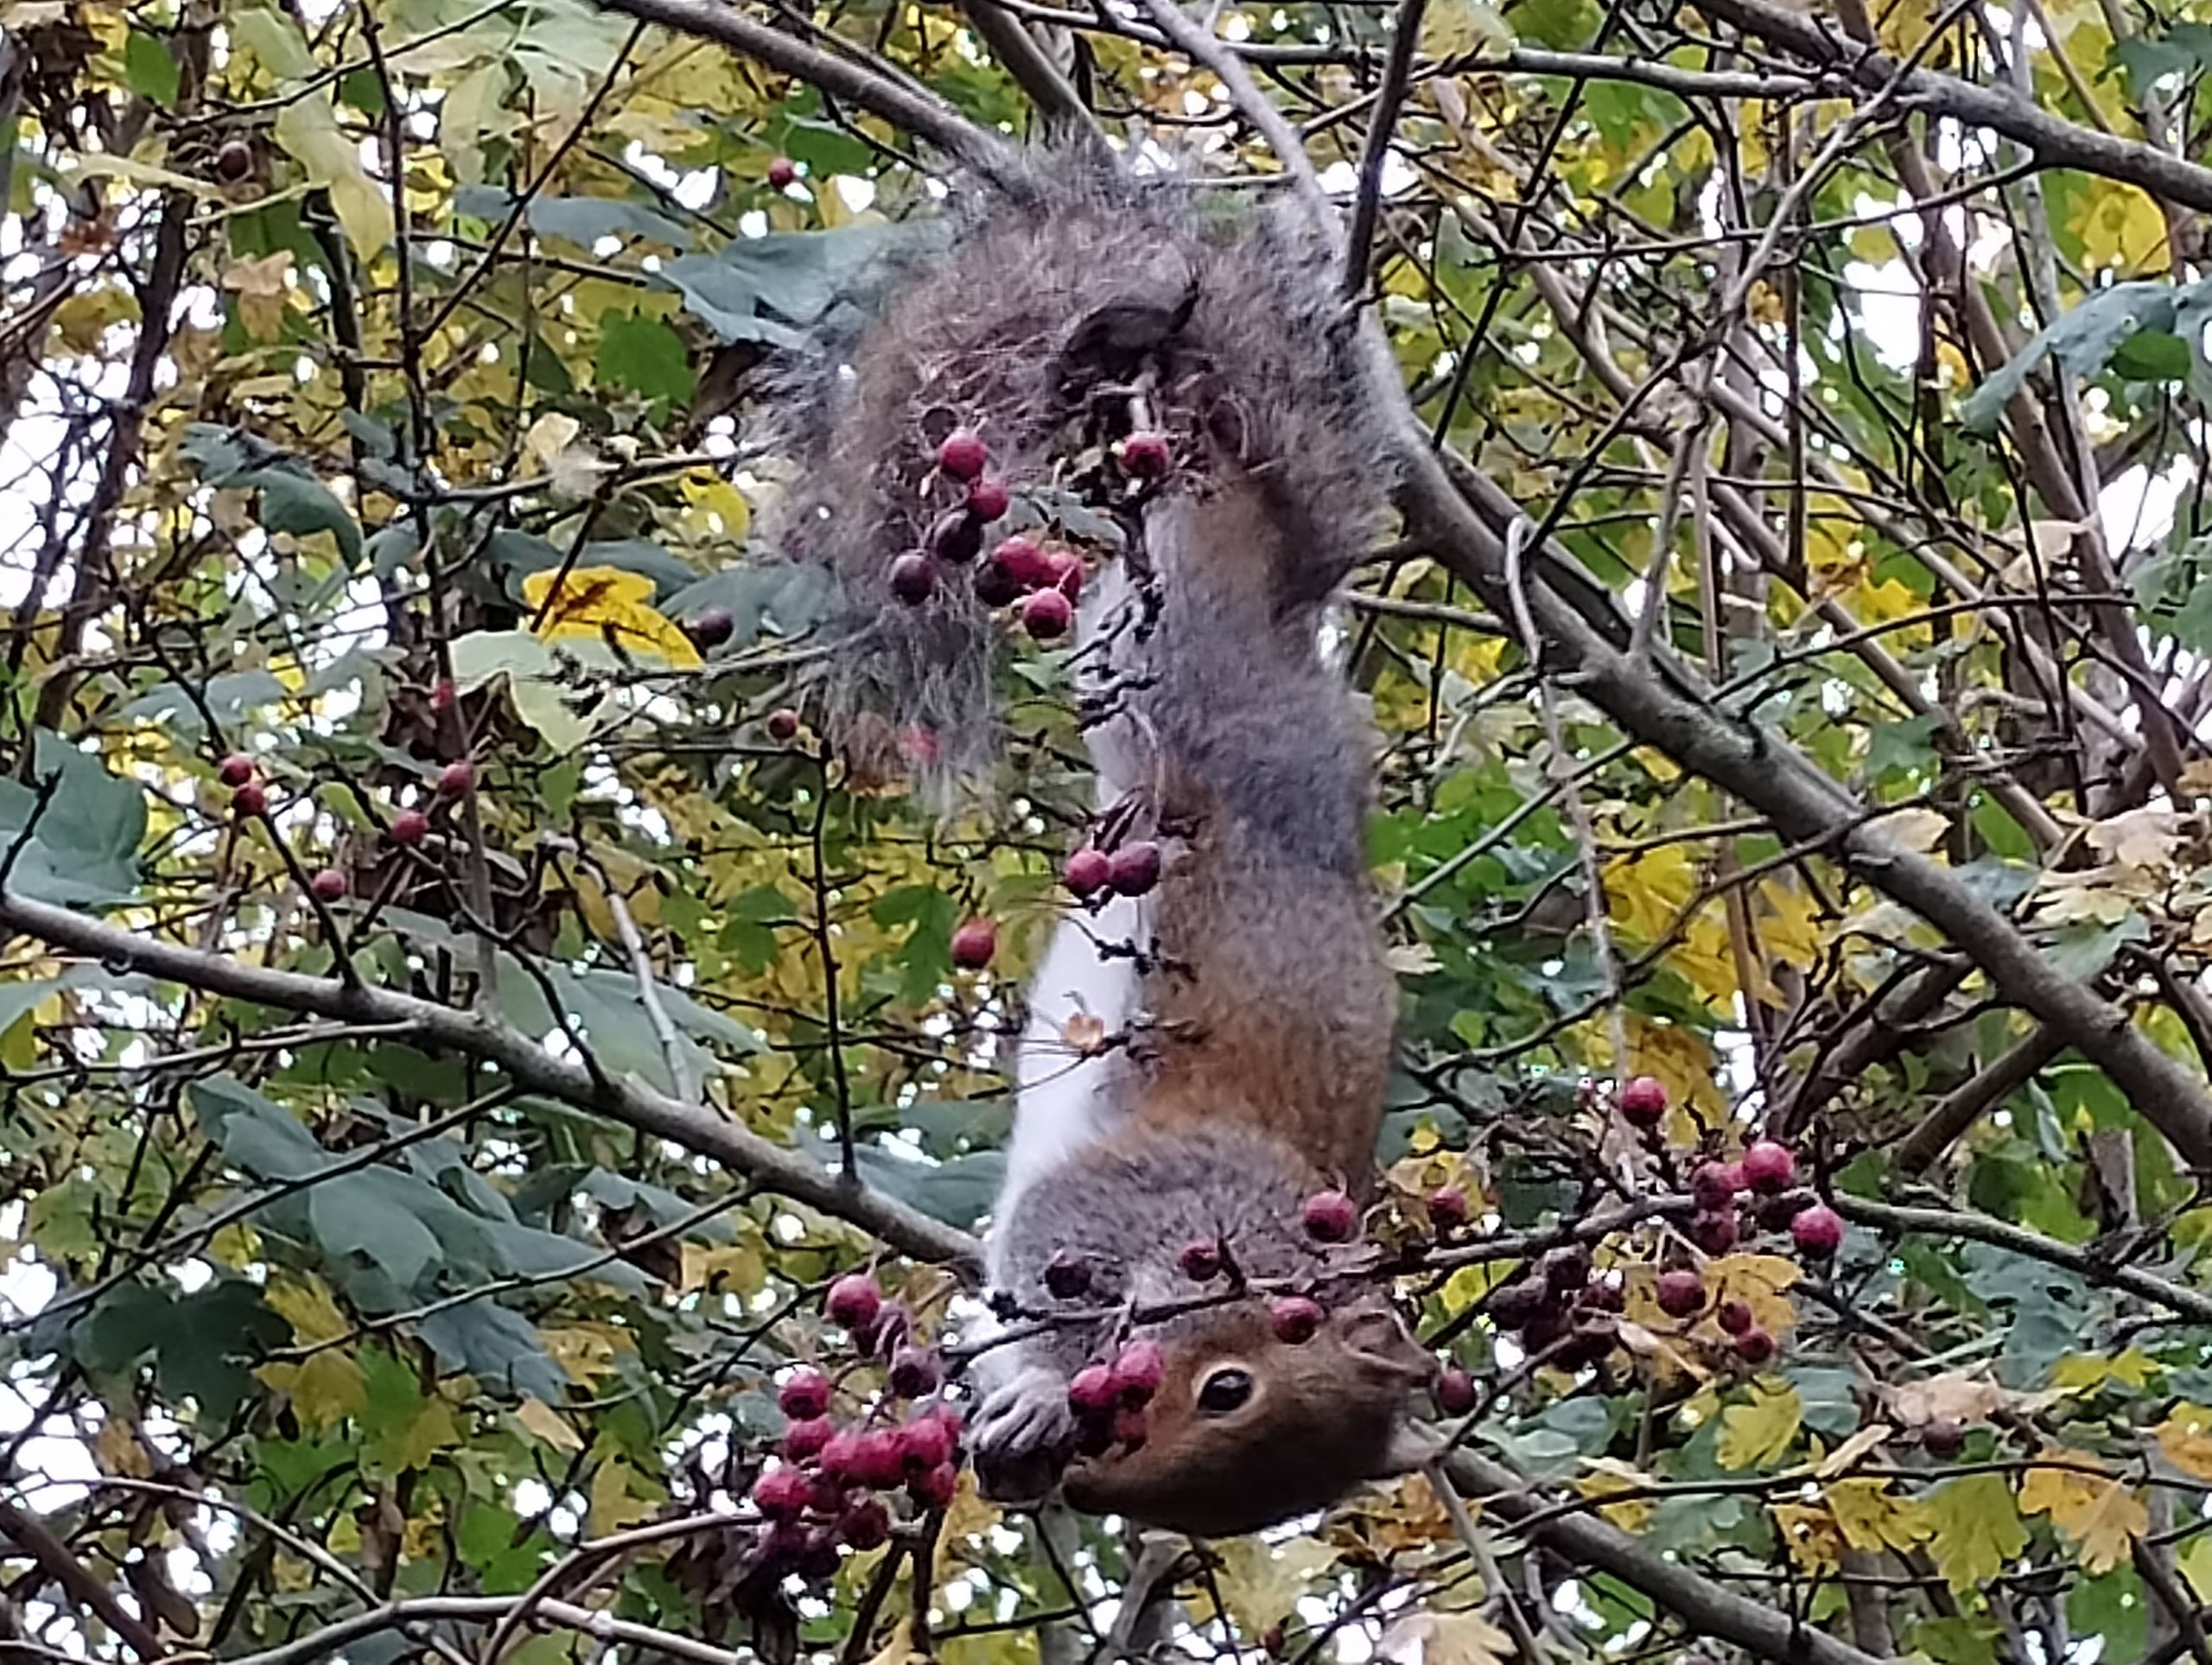 Squirrel hanging from branch trying to get at berries